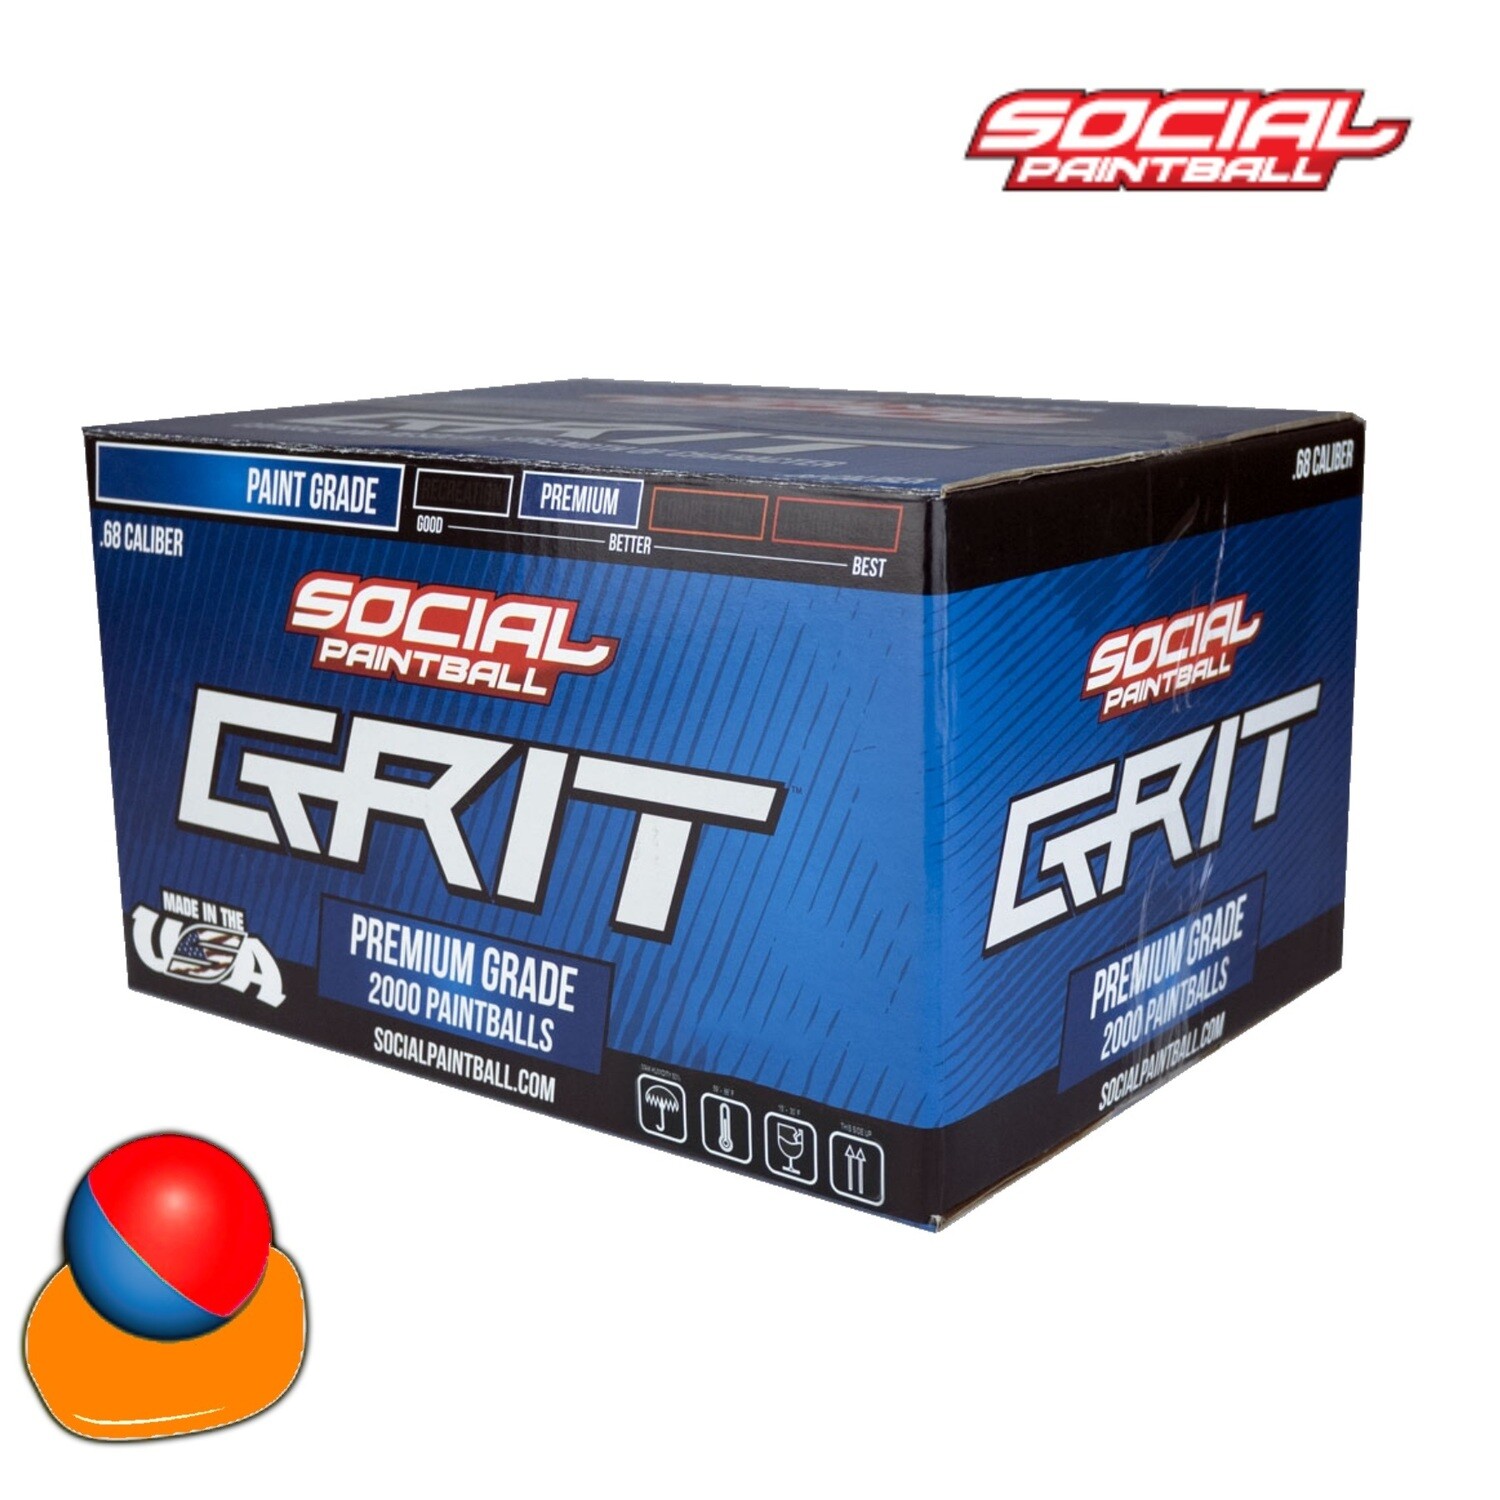 Social Paintball Grit .68 cal Paintballs - Case of 2000 Rds - Red/Blue Shell - Orange Fill